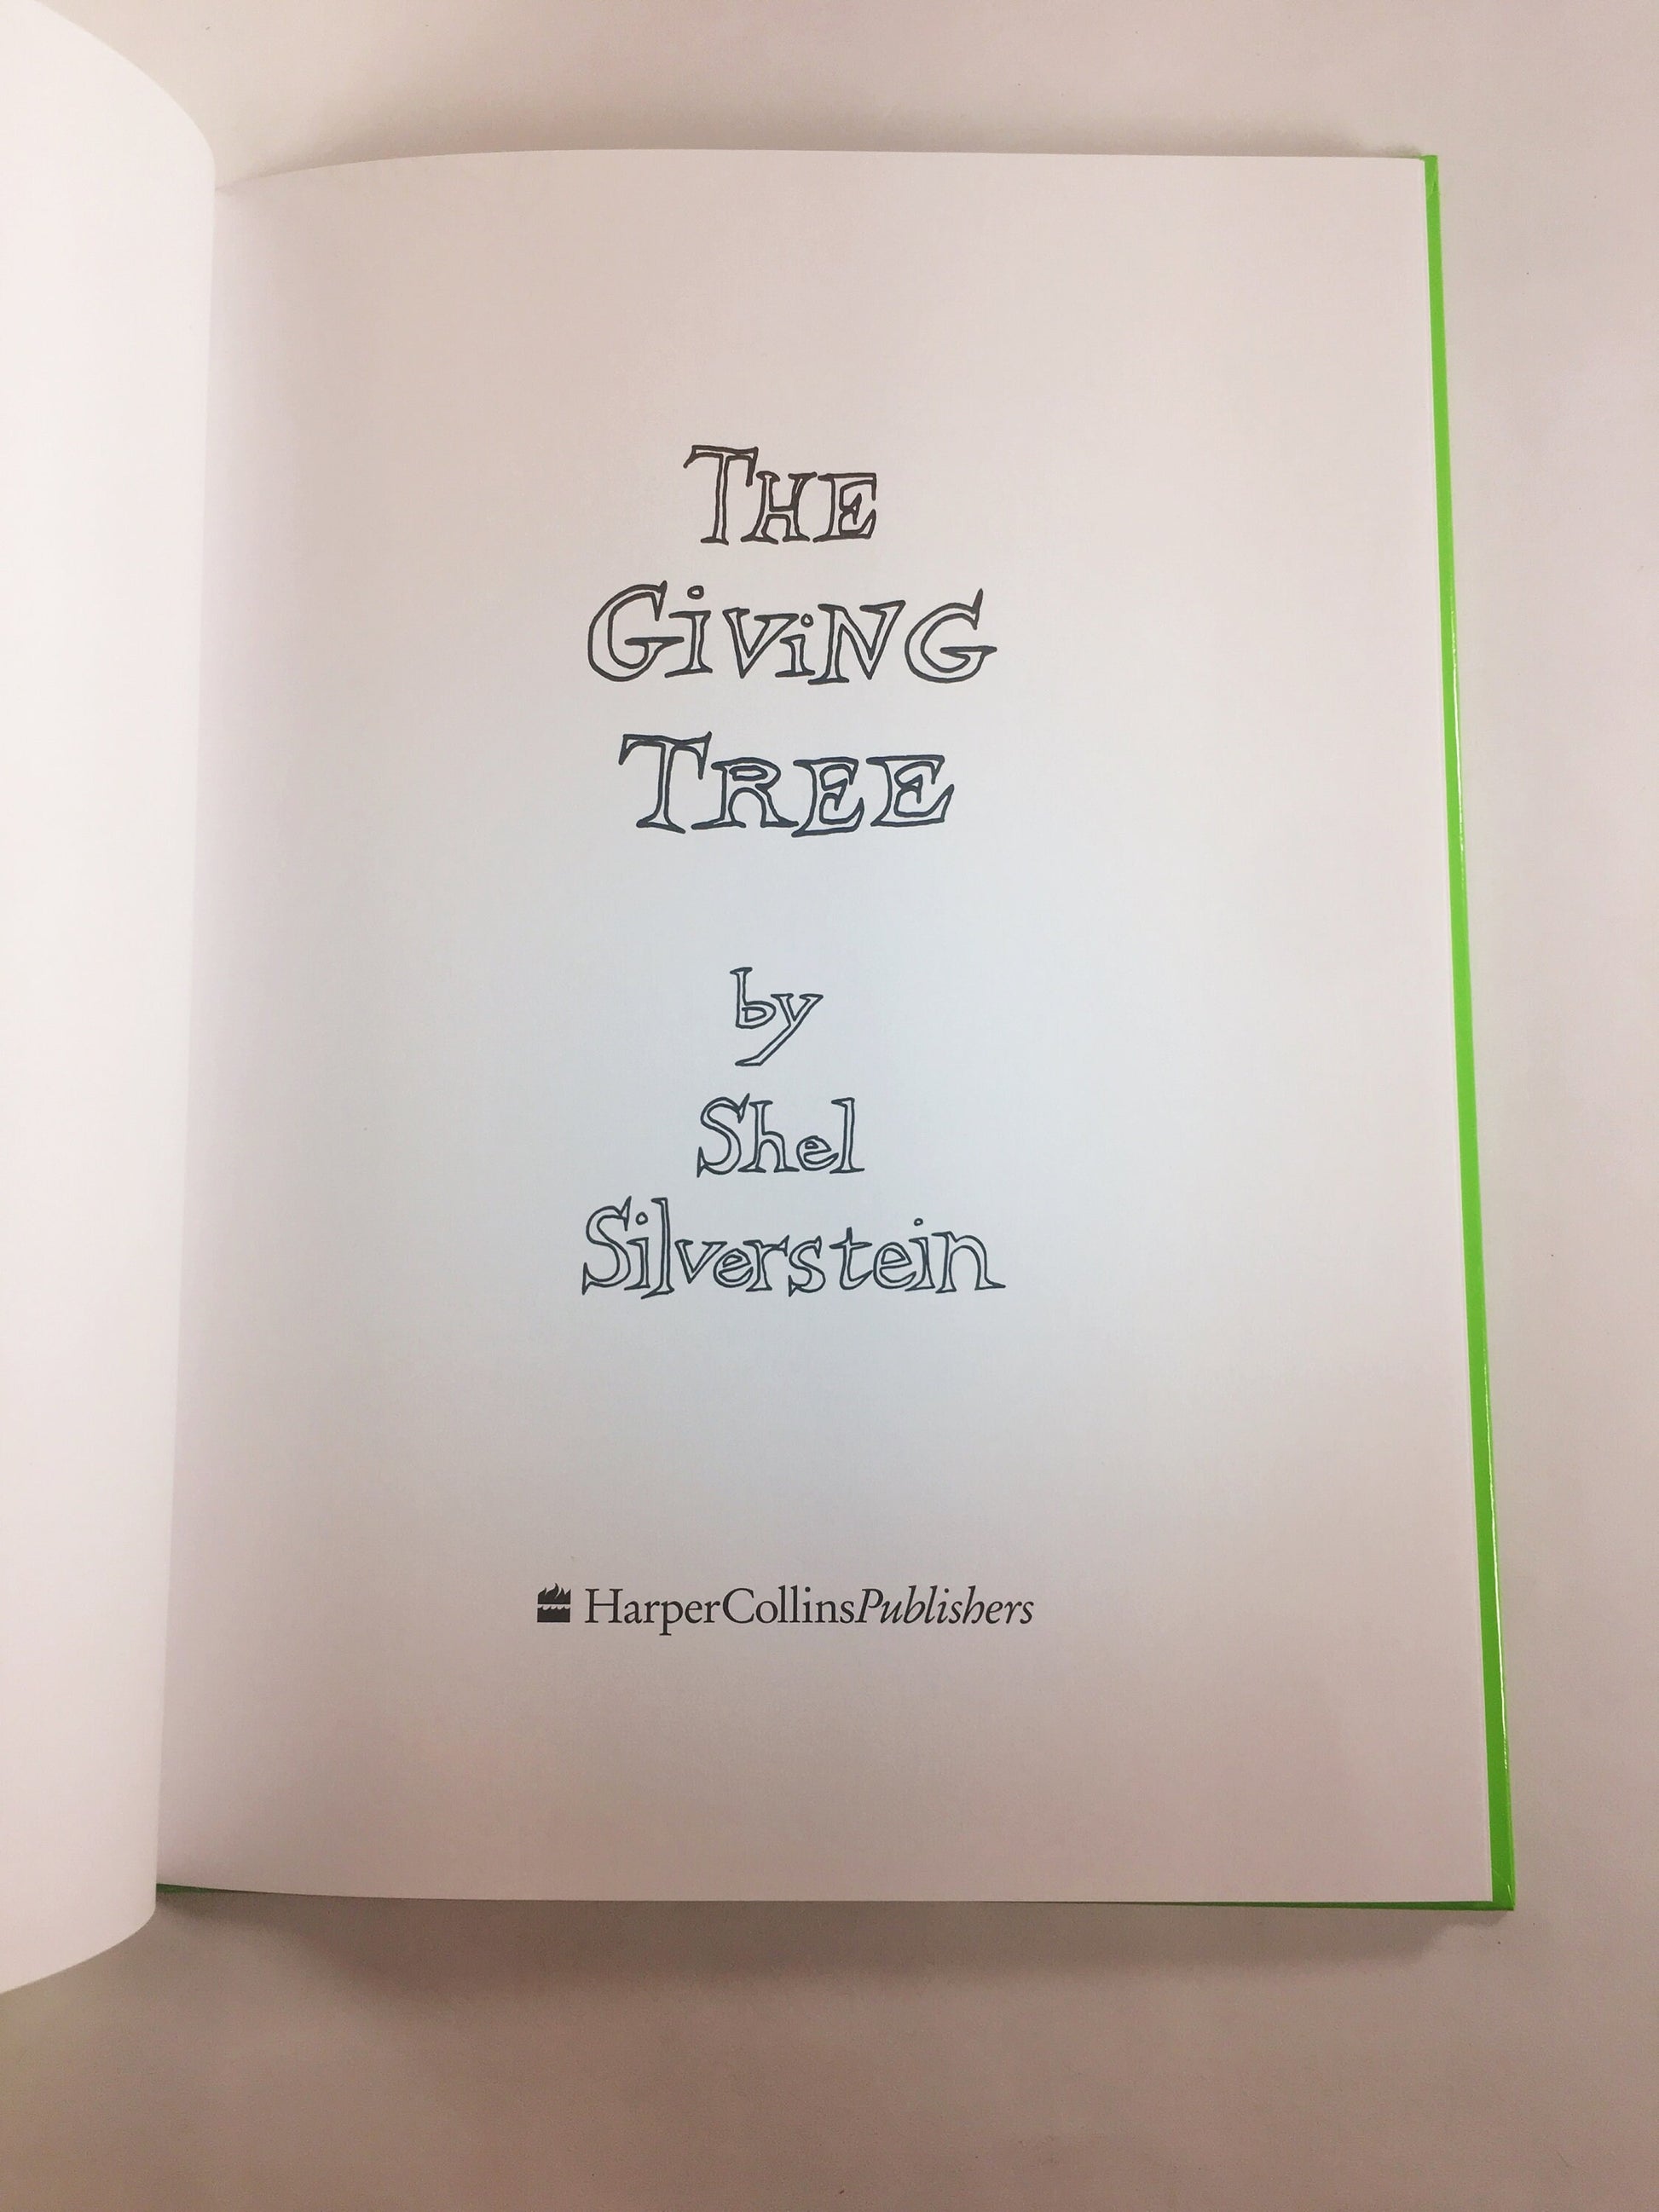 Giving Tree by Shel Silverstein. Vintage book with dust jacket. Charming Story of Selfless Acts of kindness. New baby gift. Green book decor